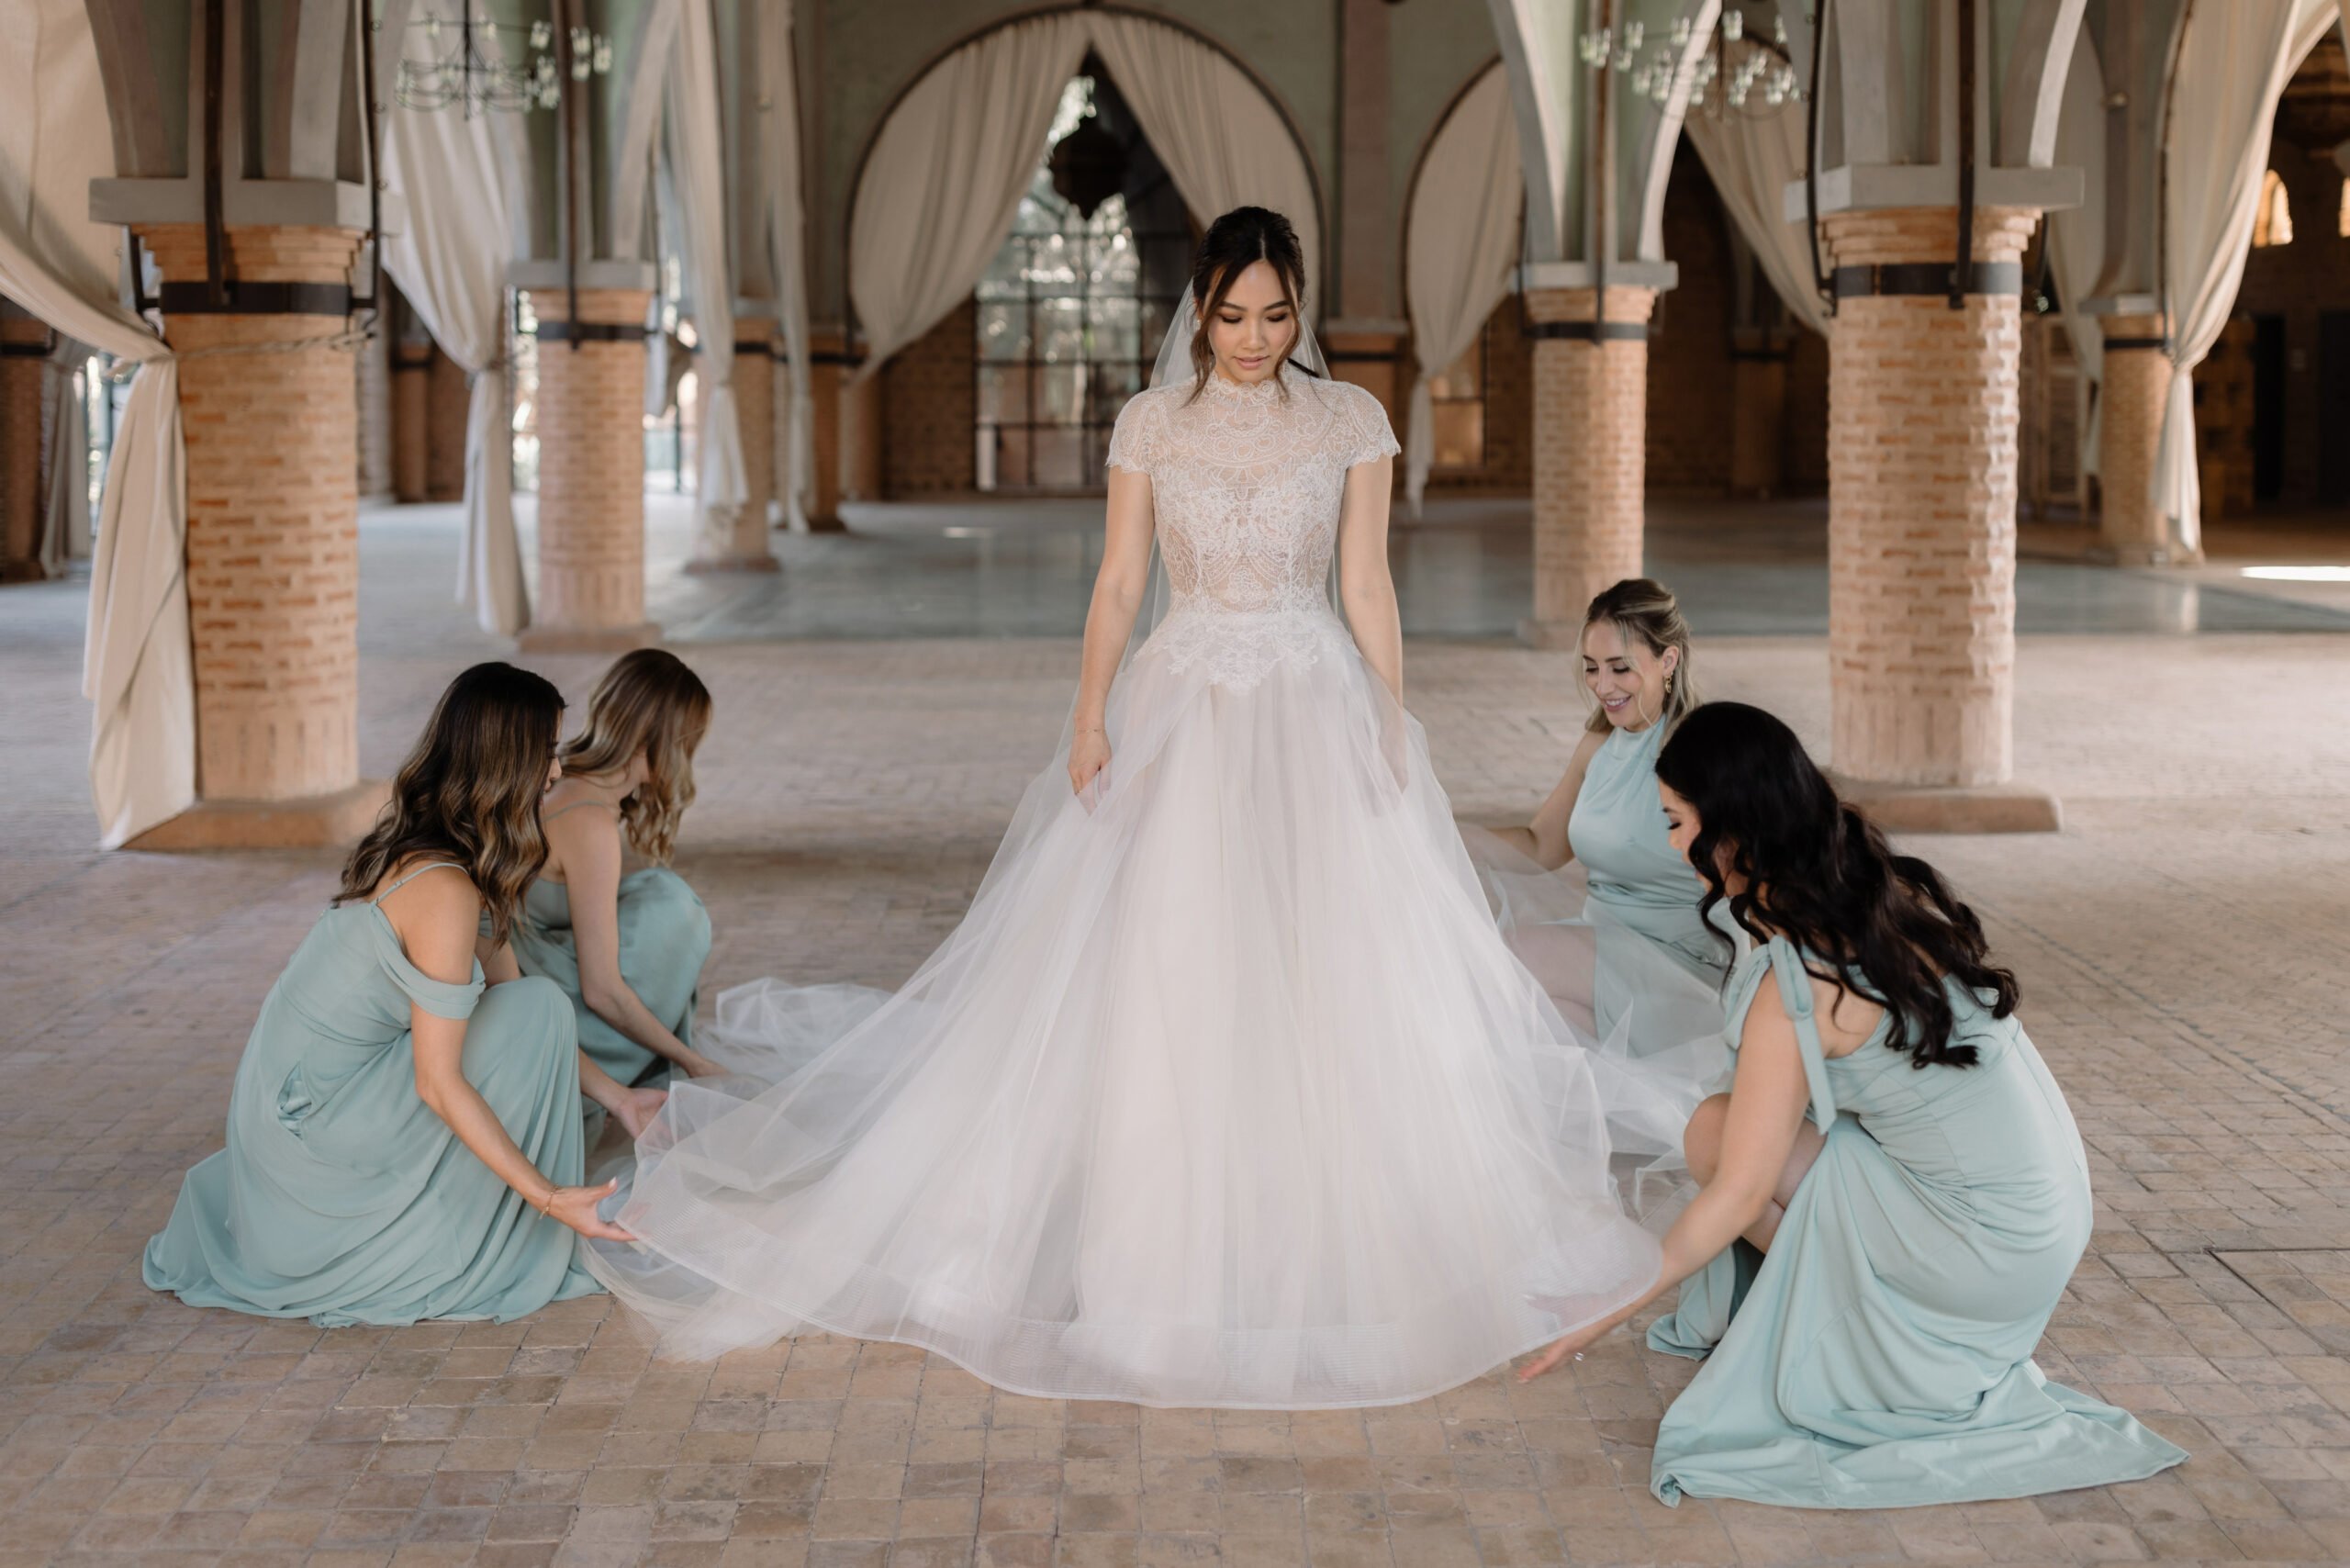 Bride and bridesmaids at Beldi Country Club wedding in Marrakech